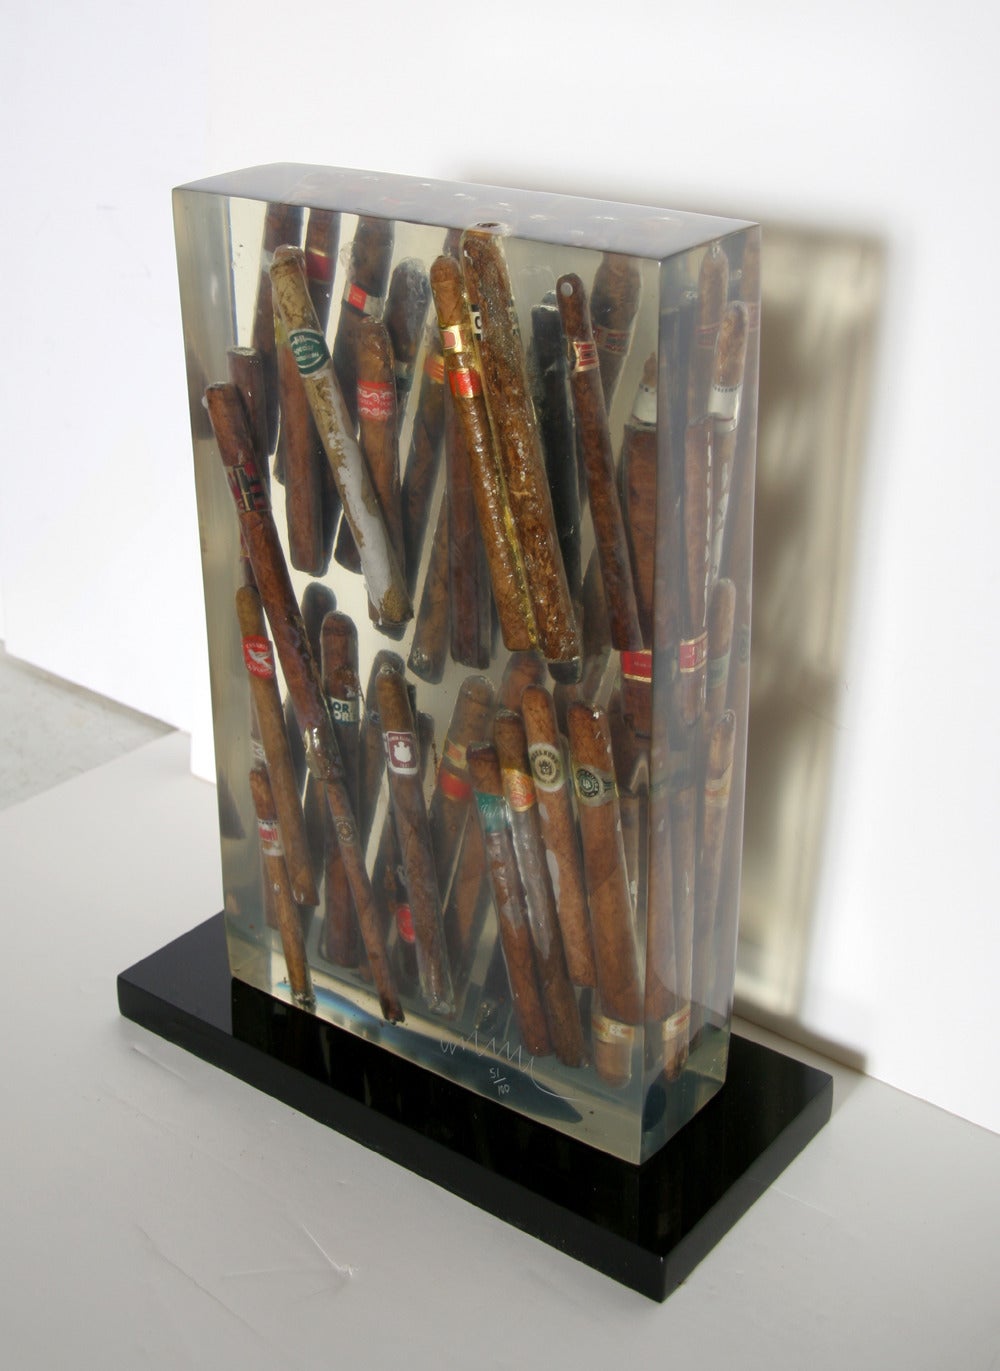 A modern art sculpture by Arman from 1997. The collection of cigars encased in clear resin is a quintessential piece from Arman's 'Accumulations' period in which he took a group of everyday objects, usually mass-produced in nature, and embedded them